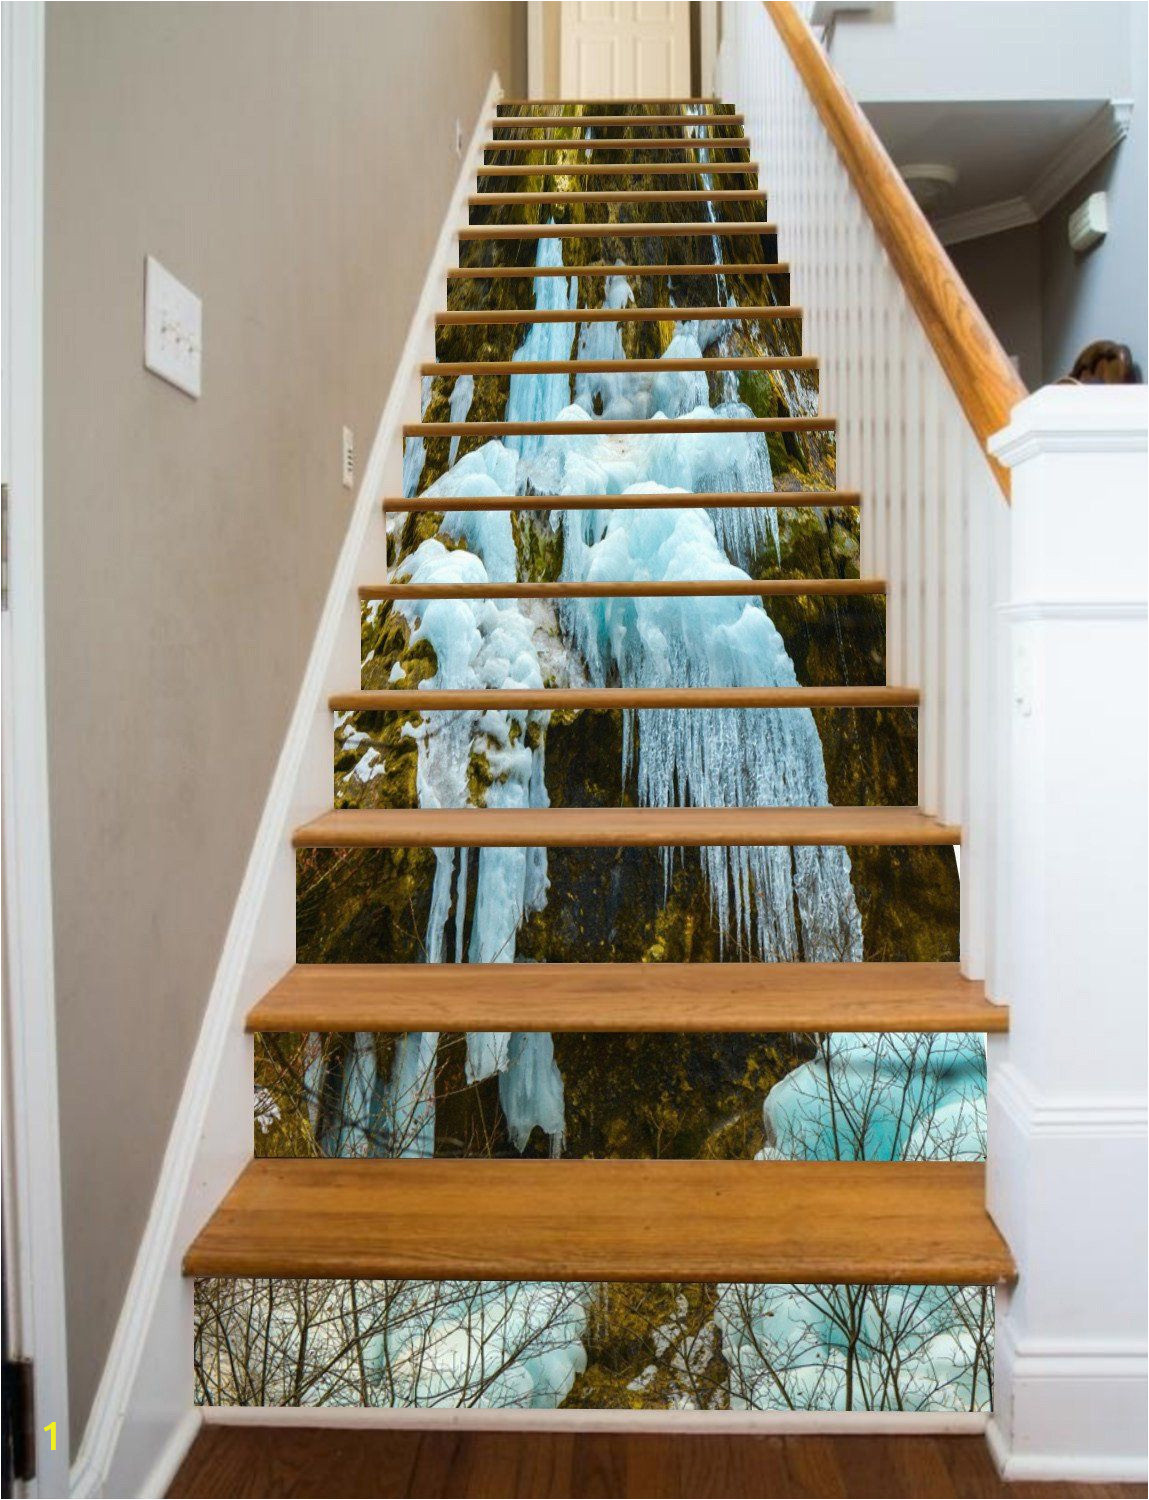 Snow Scene Wall Murals 3d Ice and Snow 752 Stair Risers In 2019